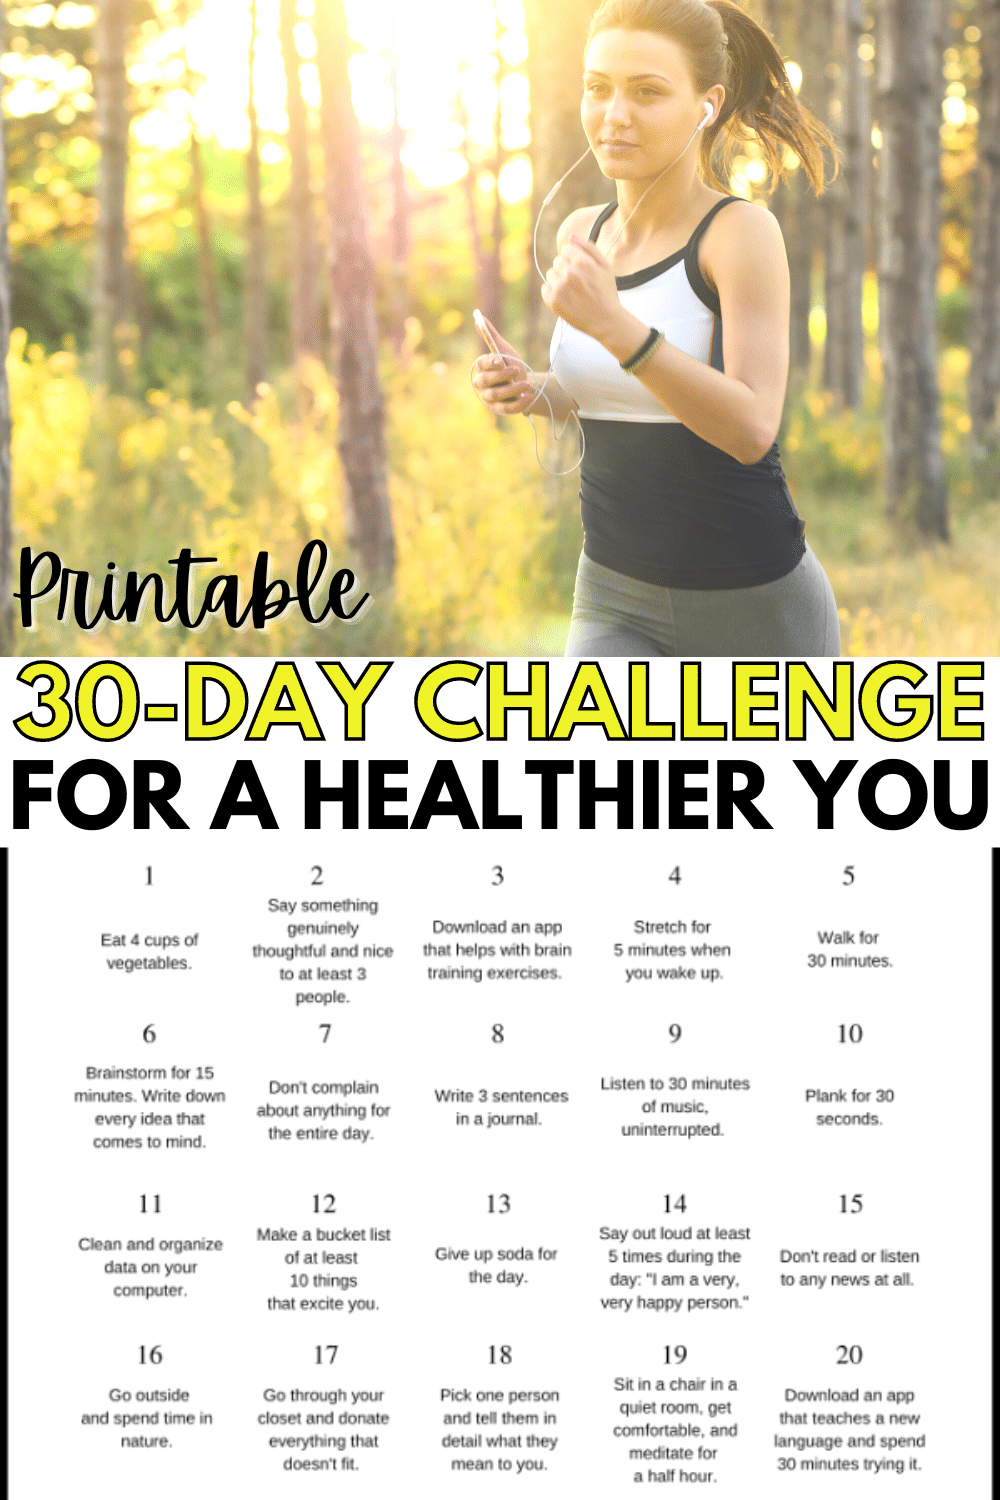 Printable challenge for a healthier you.